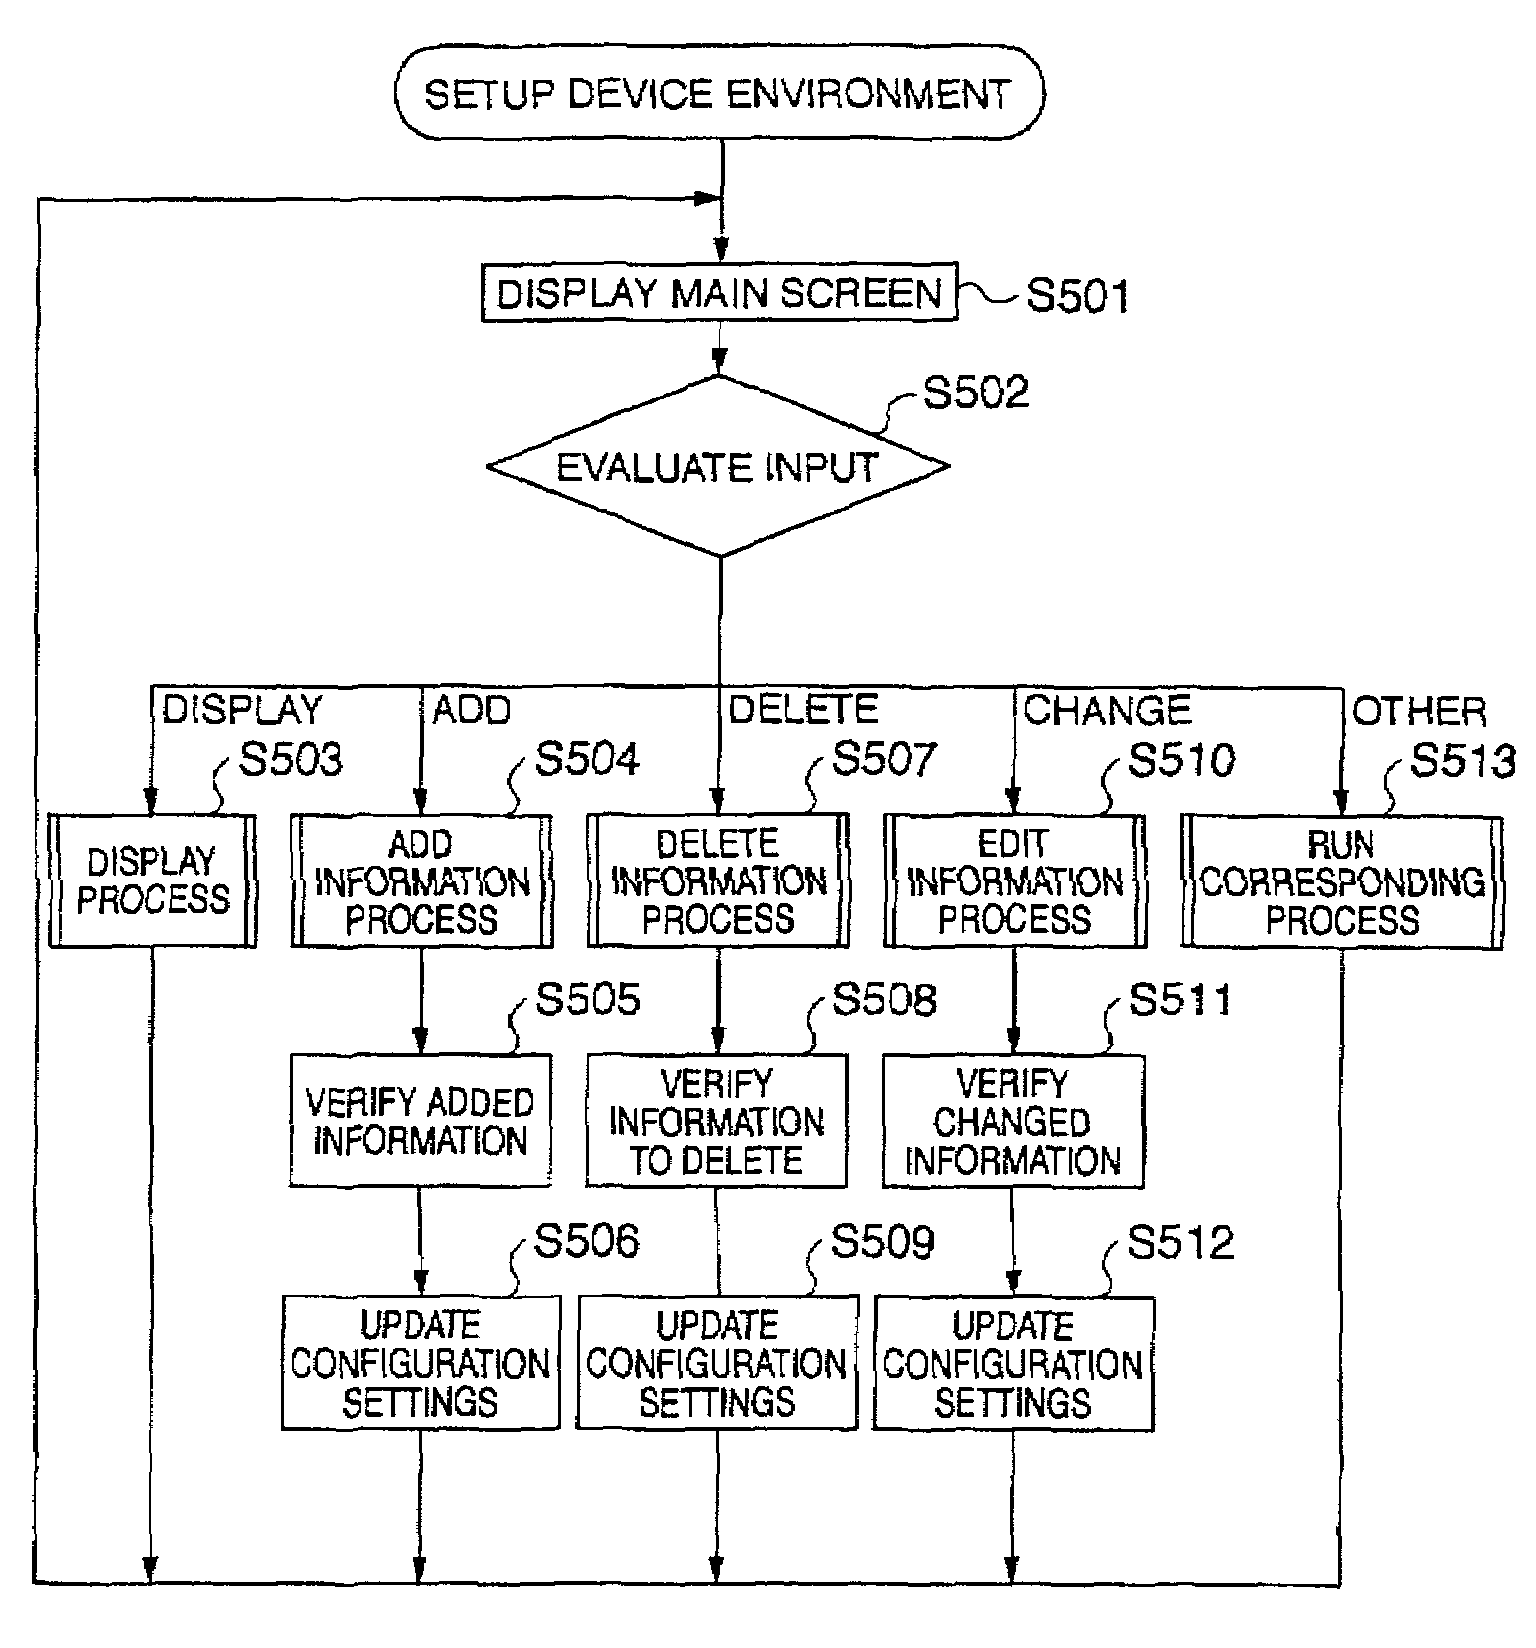 Device environment configuration system and method, and data storage therefor